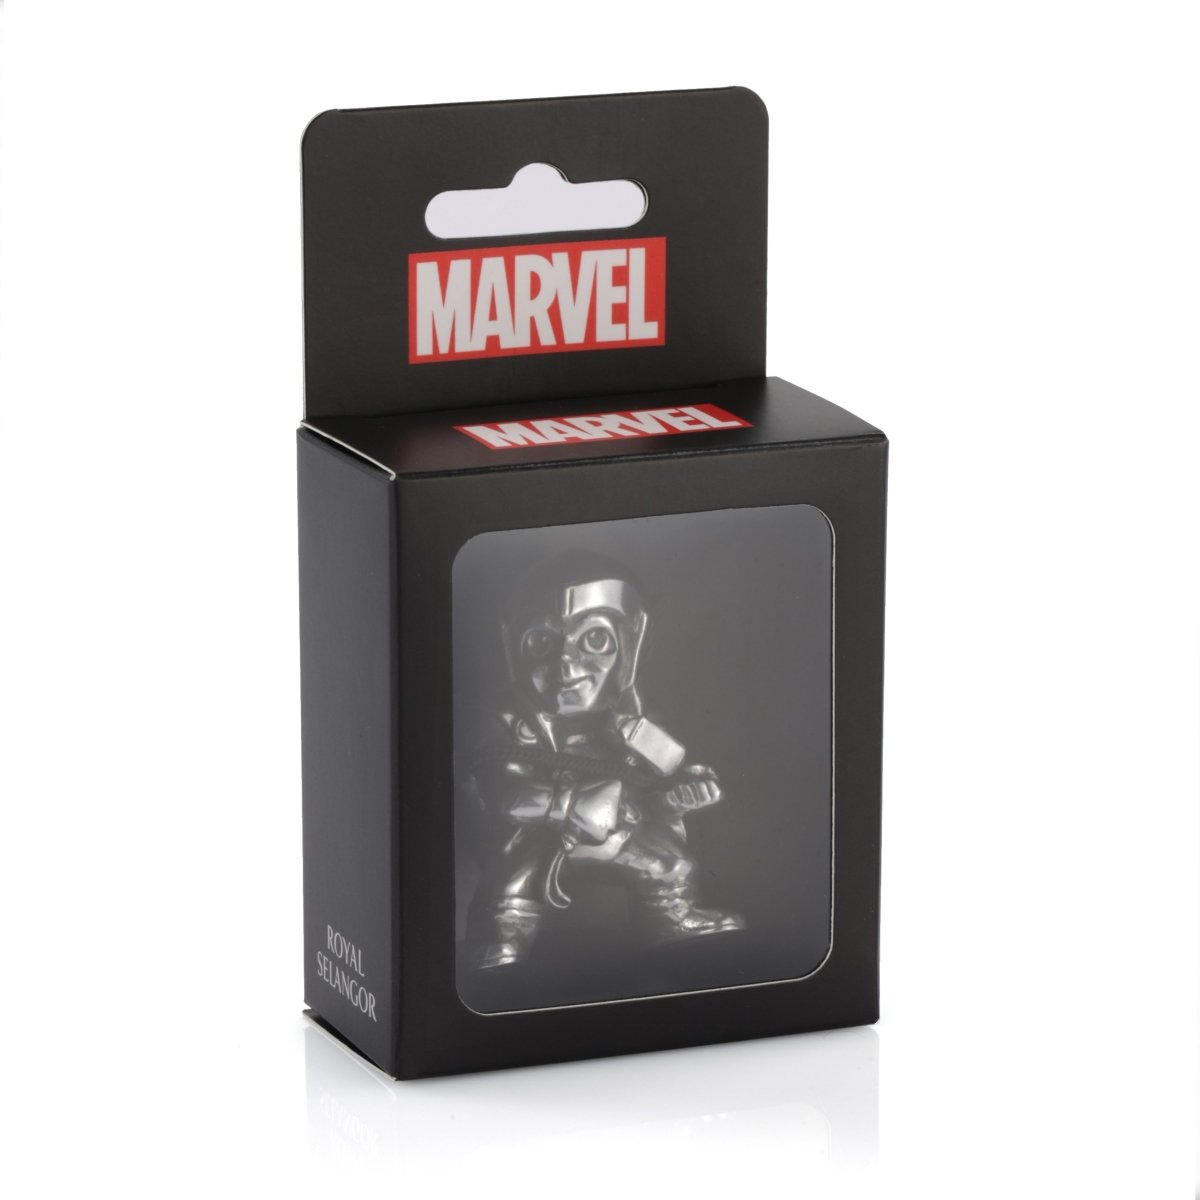 Thor Miniature Figurine - Marvel Collectible gift